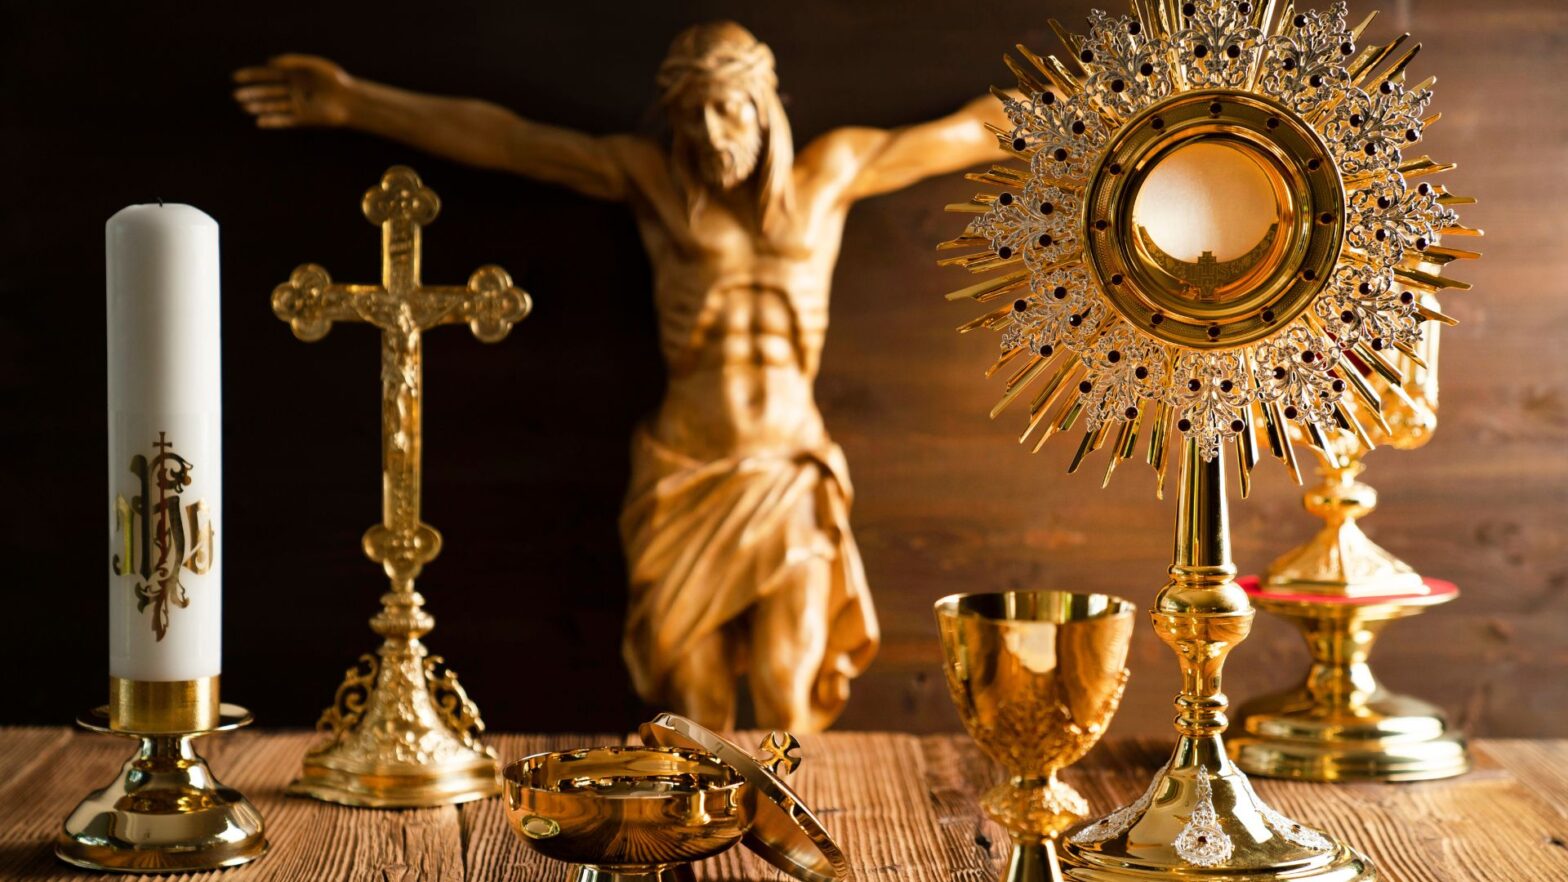 Catholic items include a gold crucifix, chalice and monstrance.